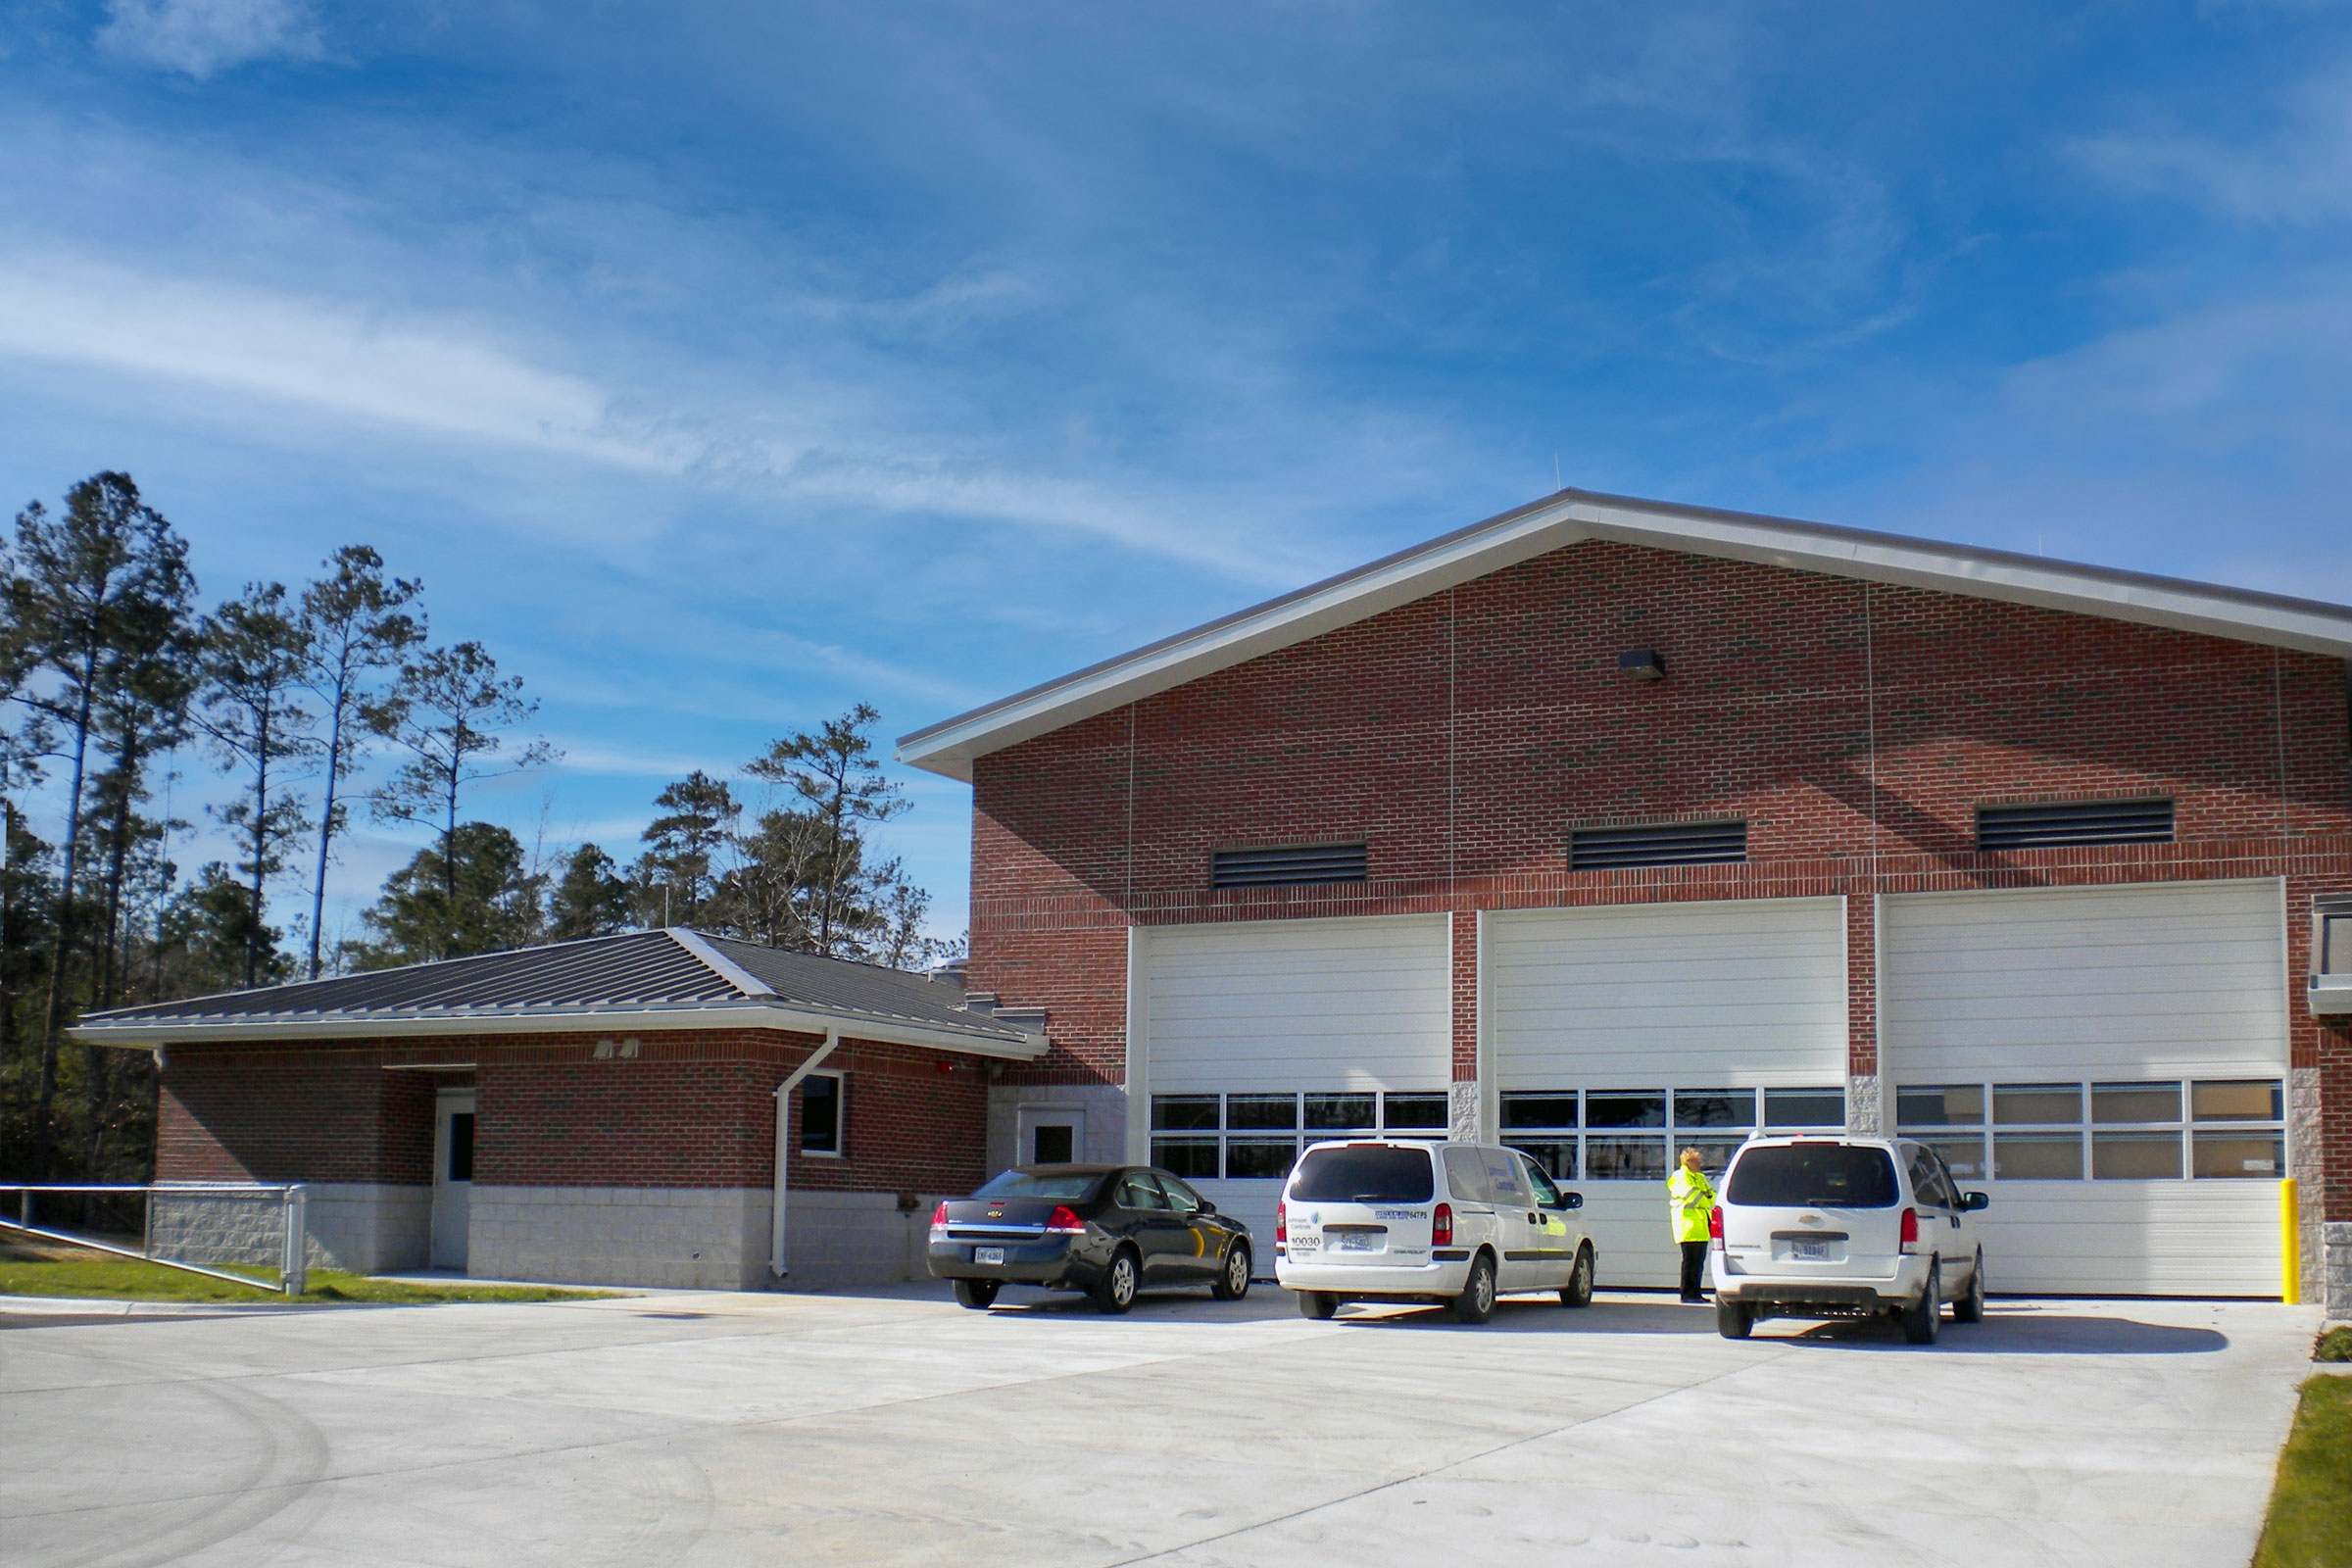 MARSOC Fire Station at Camp LeJeune in Jacksonville, NC